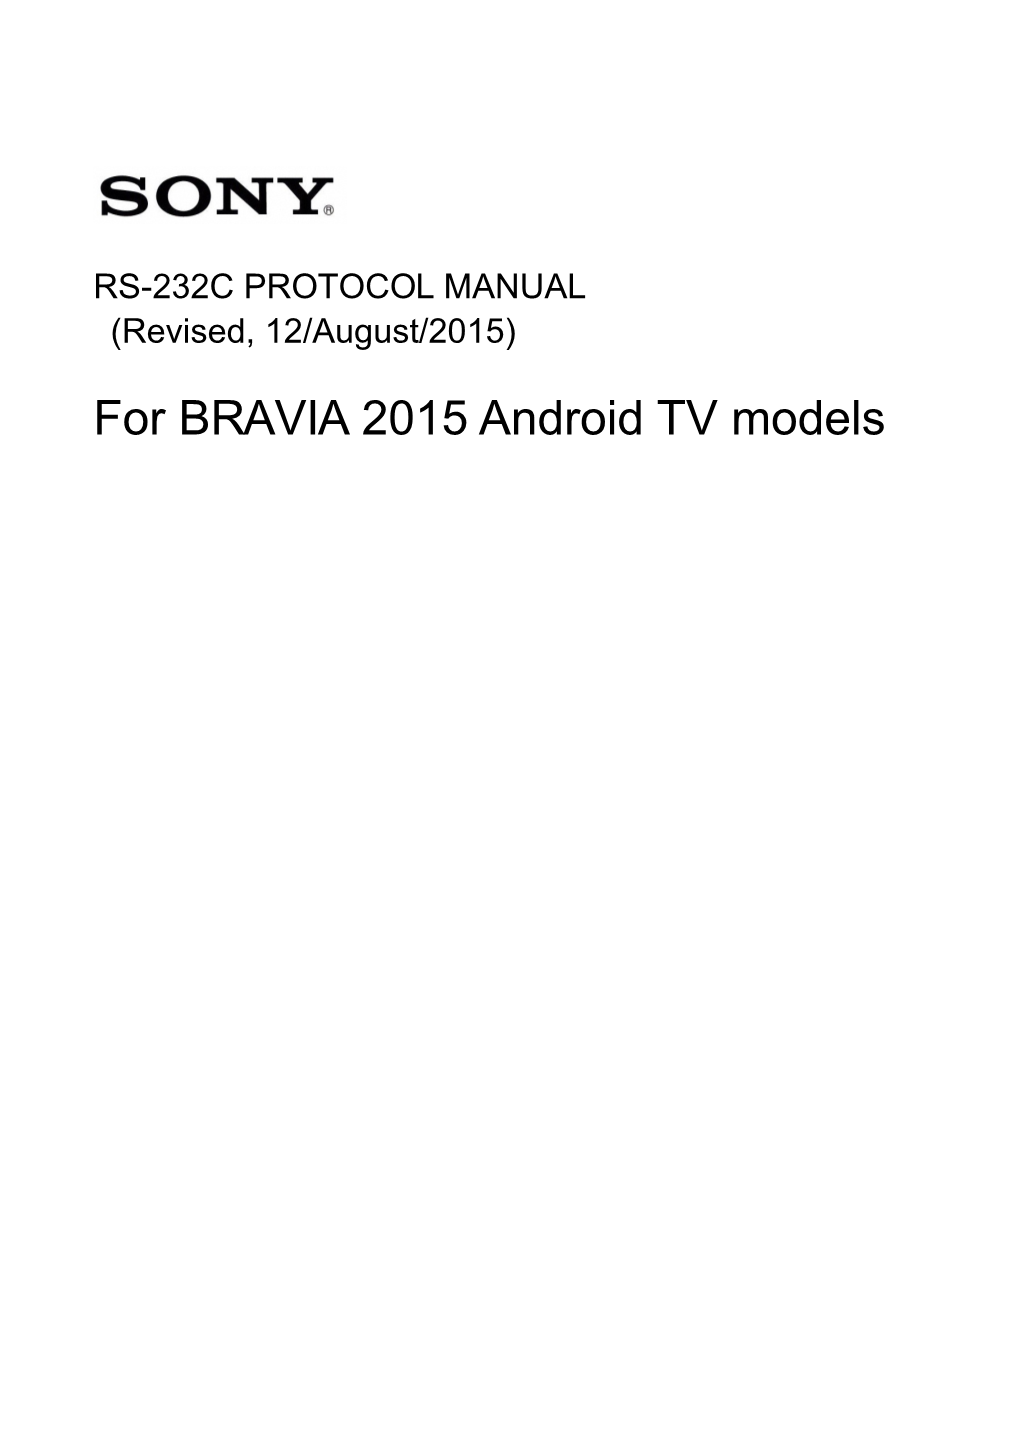 For BRAVIA 2015 Android TV Models